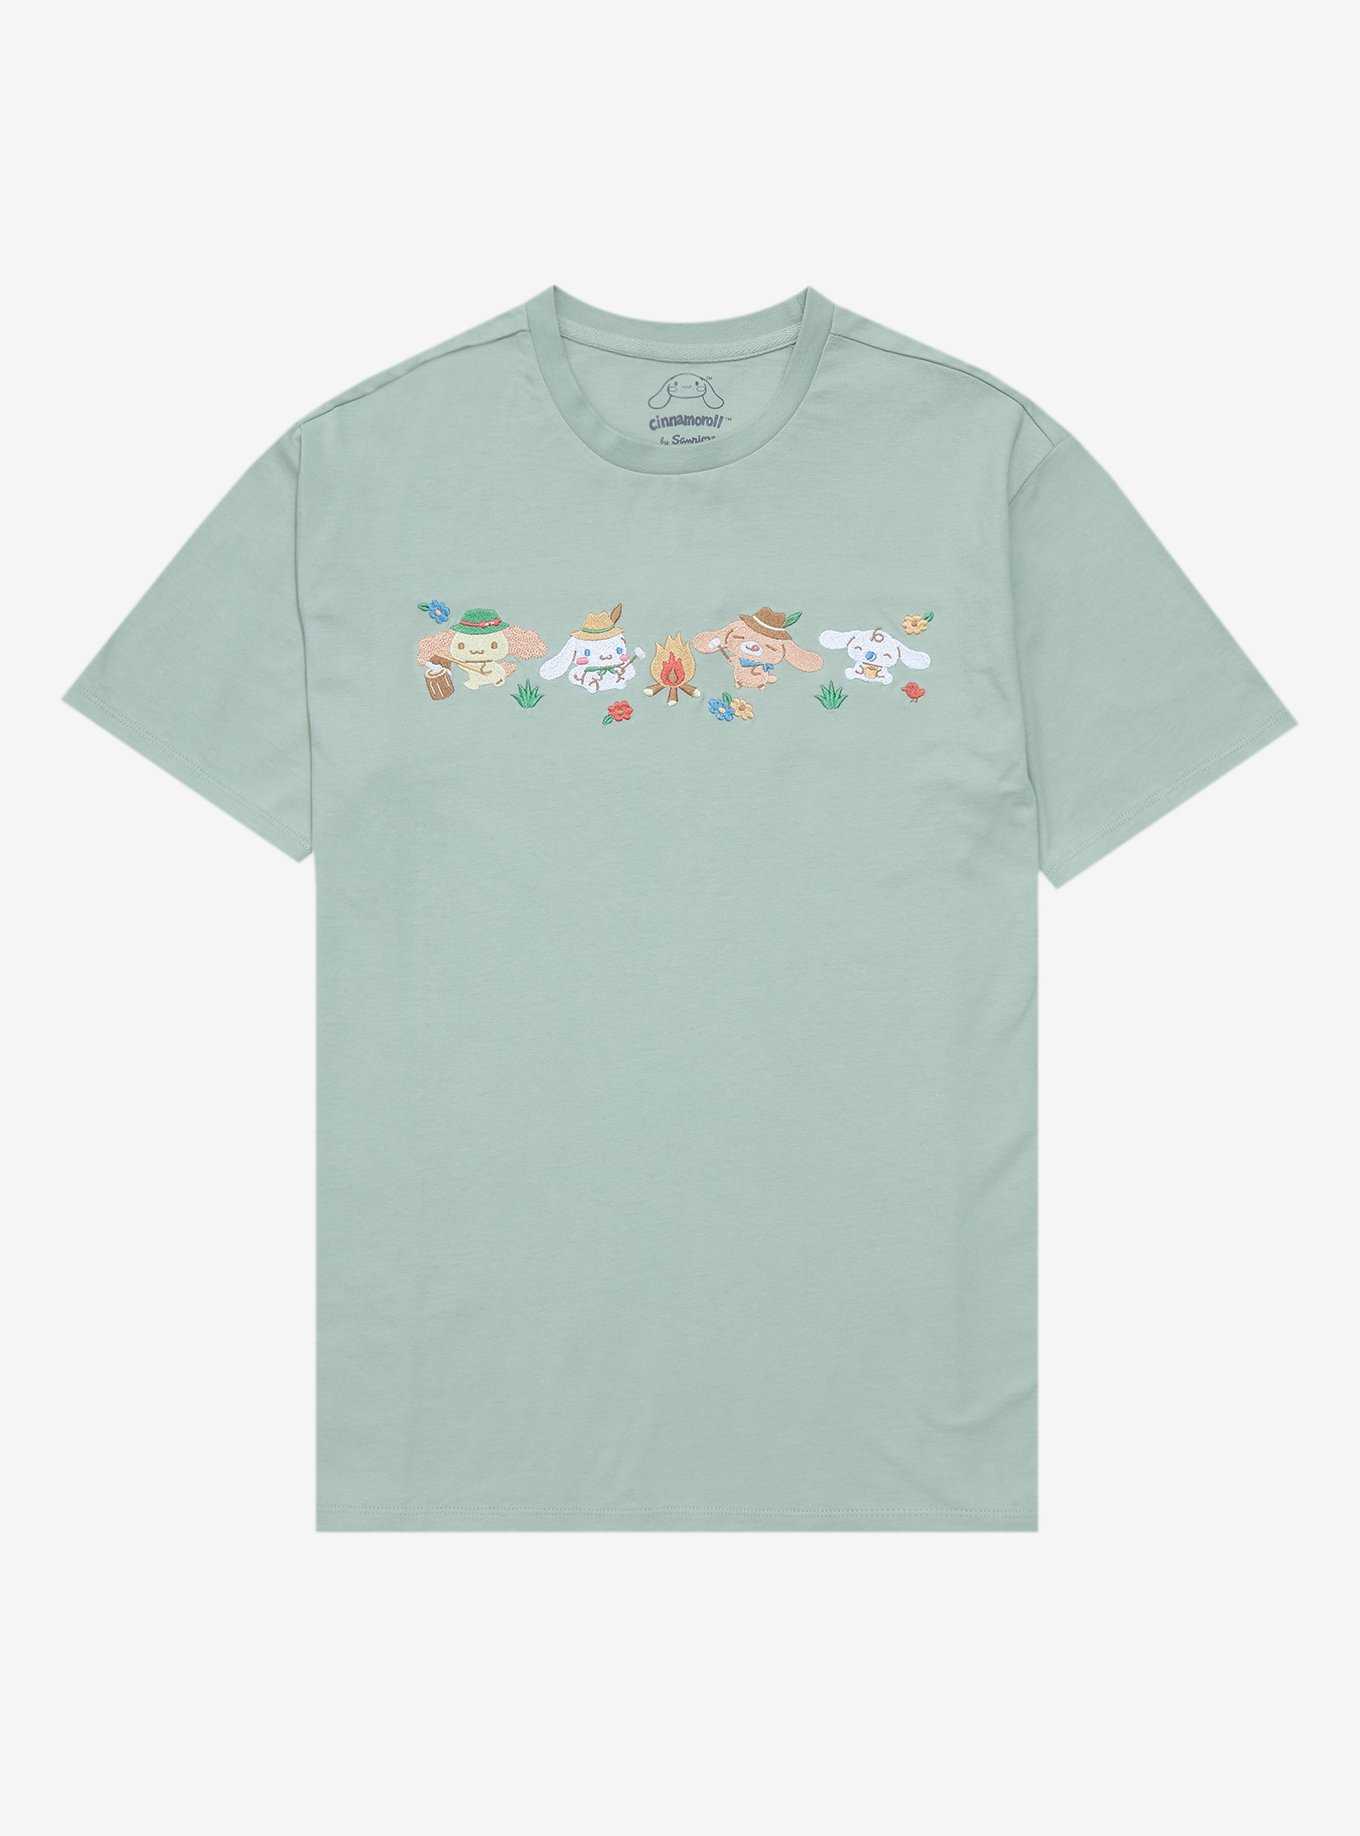 Sanrio Cinnamoroll Camping Group Portrait T-Shirt - BoxLunch Exclusive, , hi-res